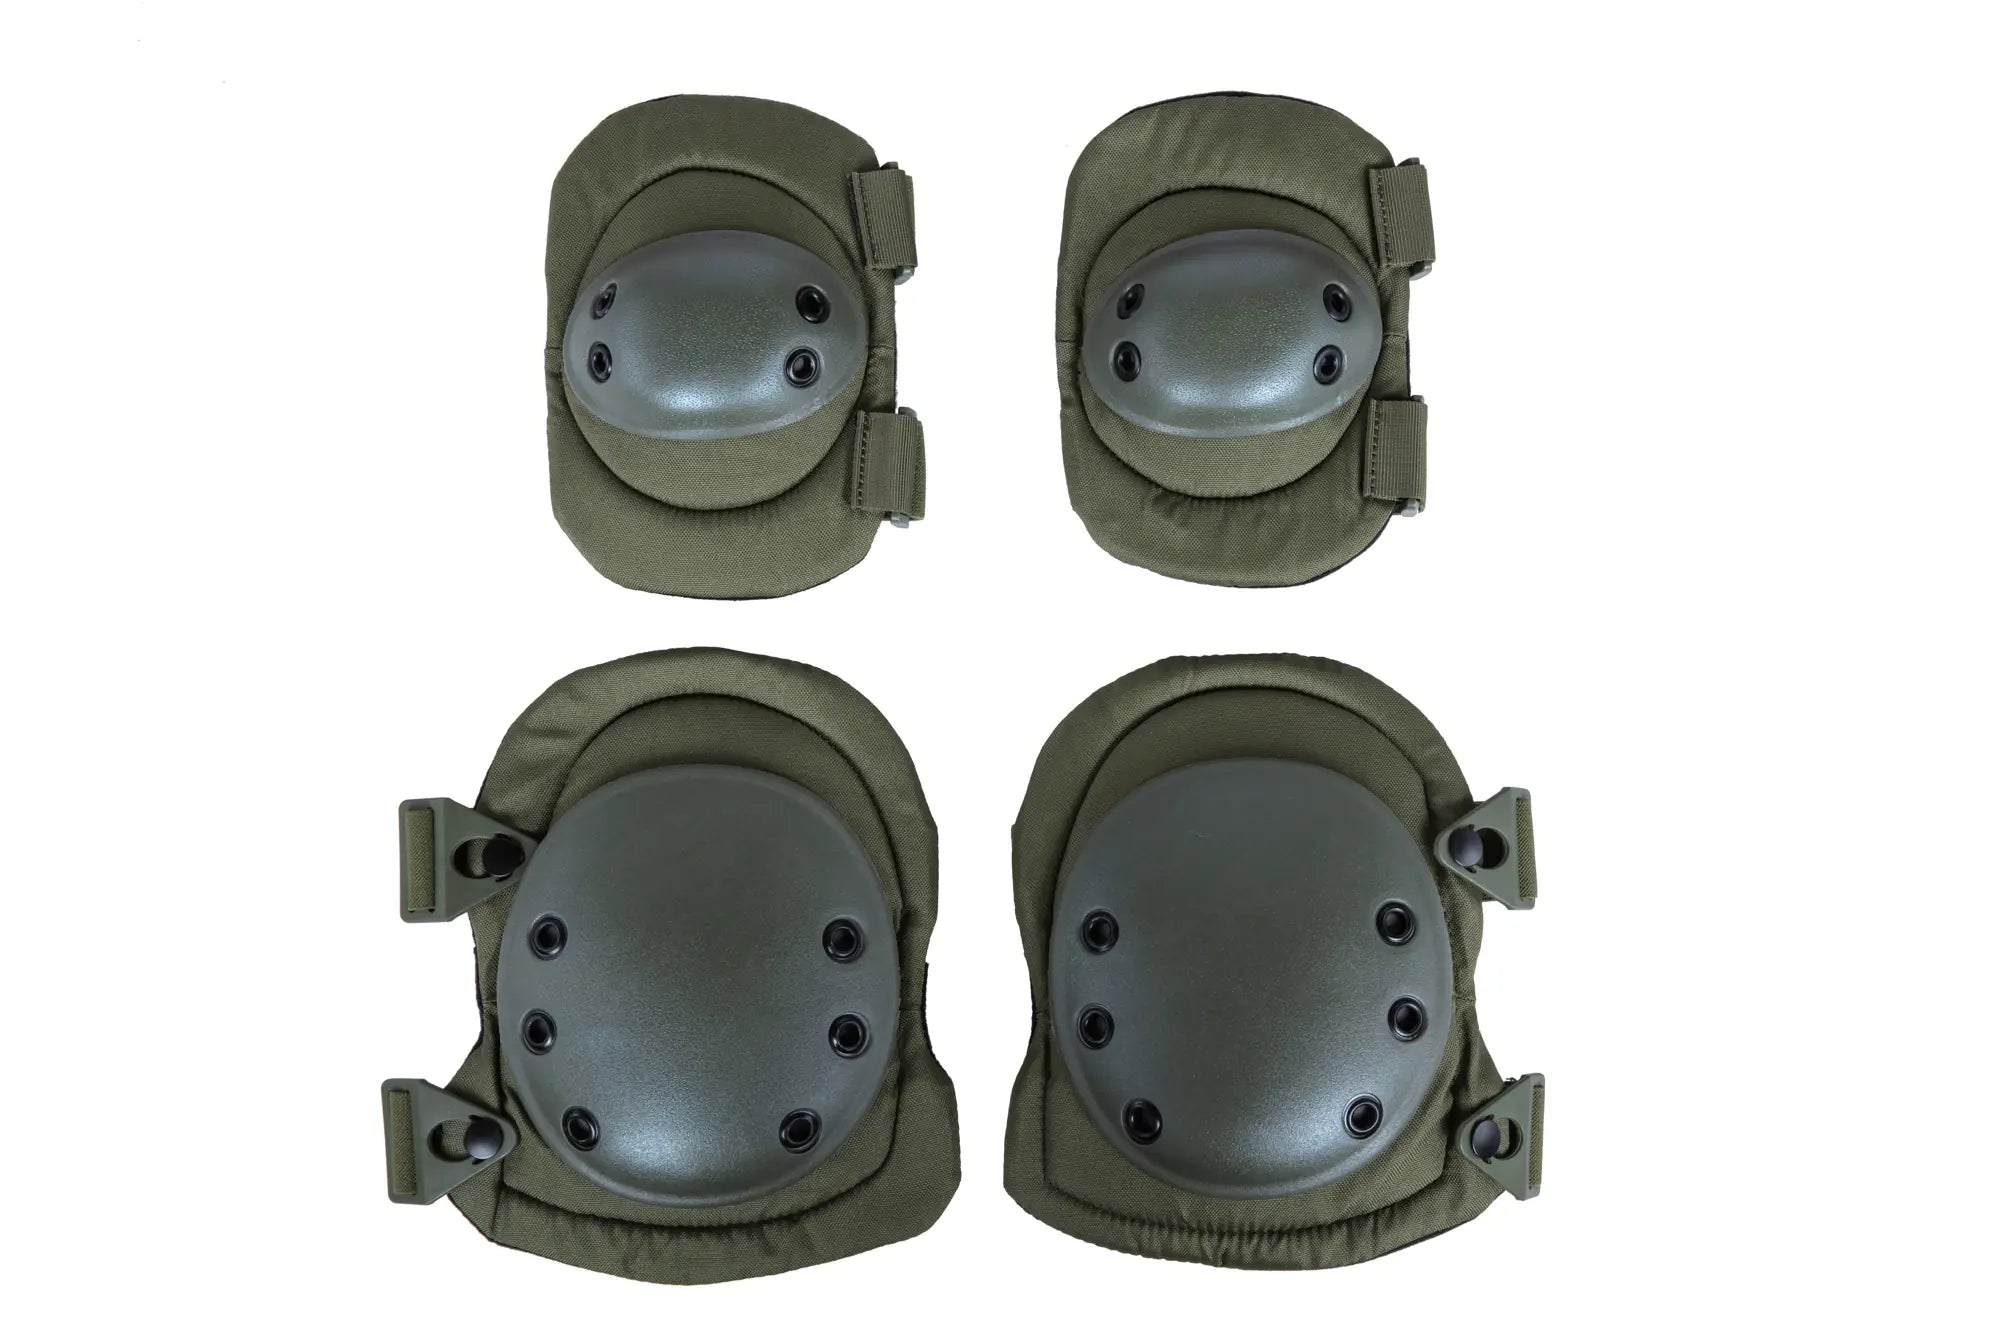 Wosport PA-07 knee and elbow protector set Olive-1